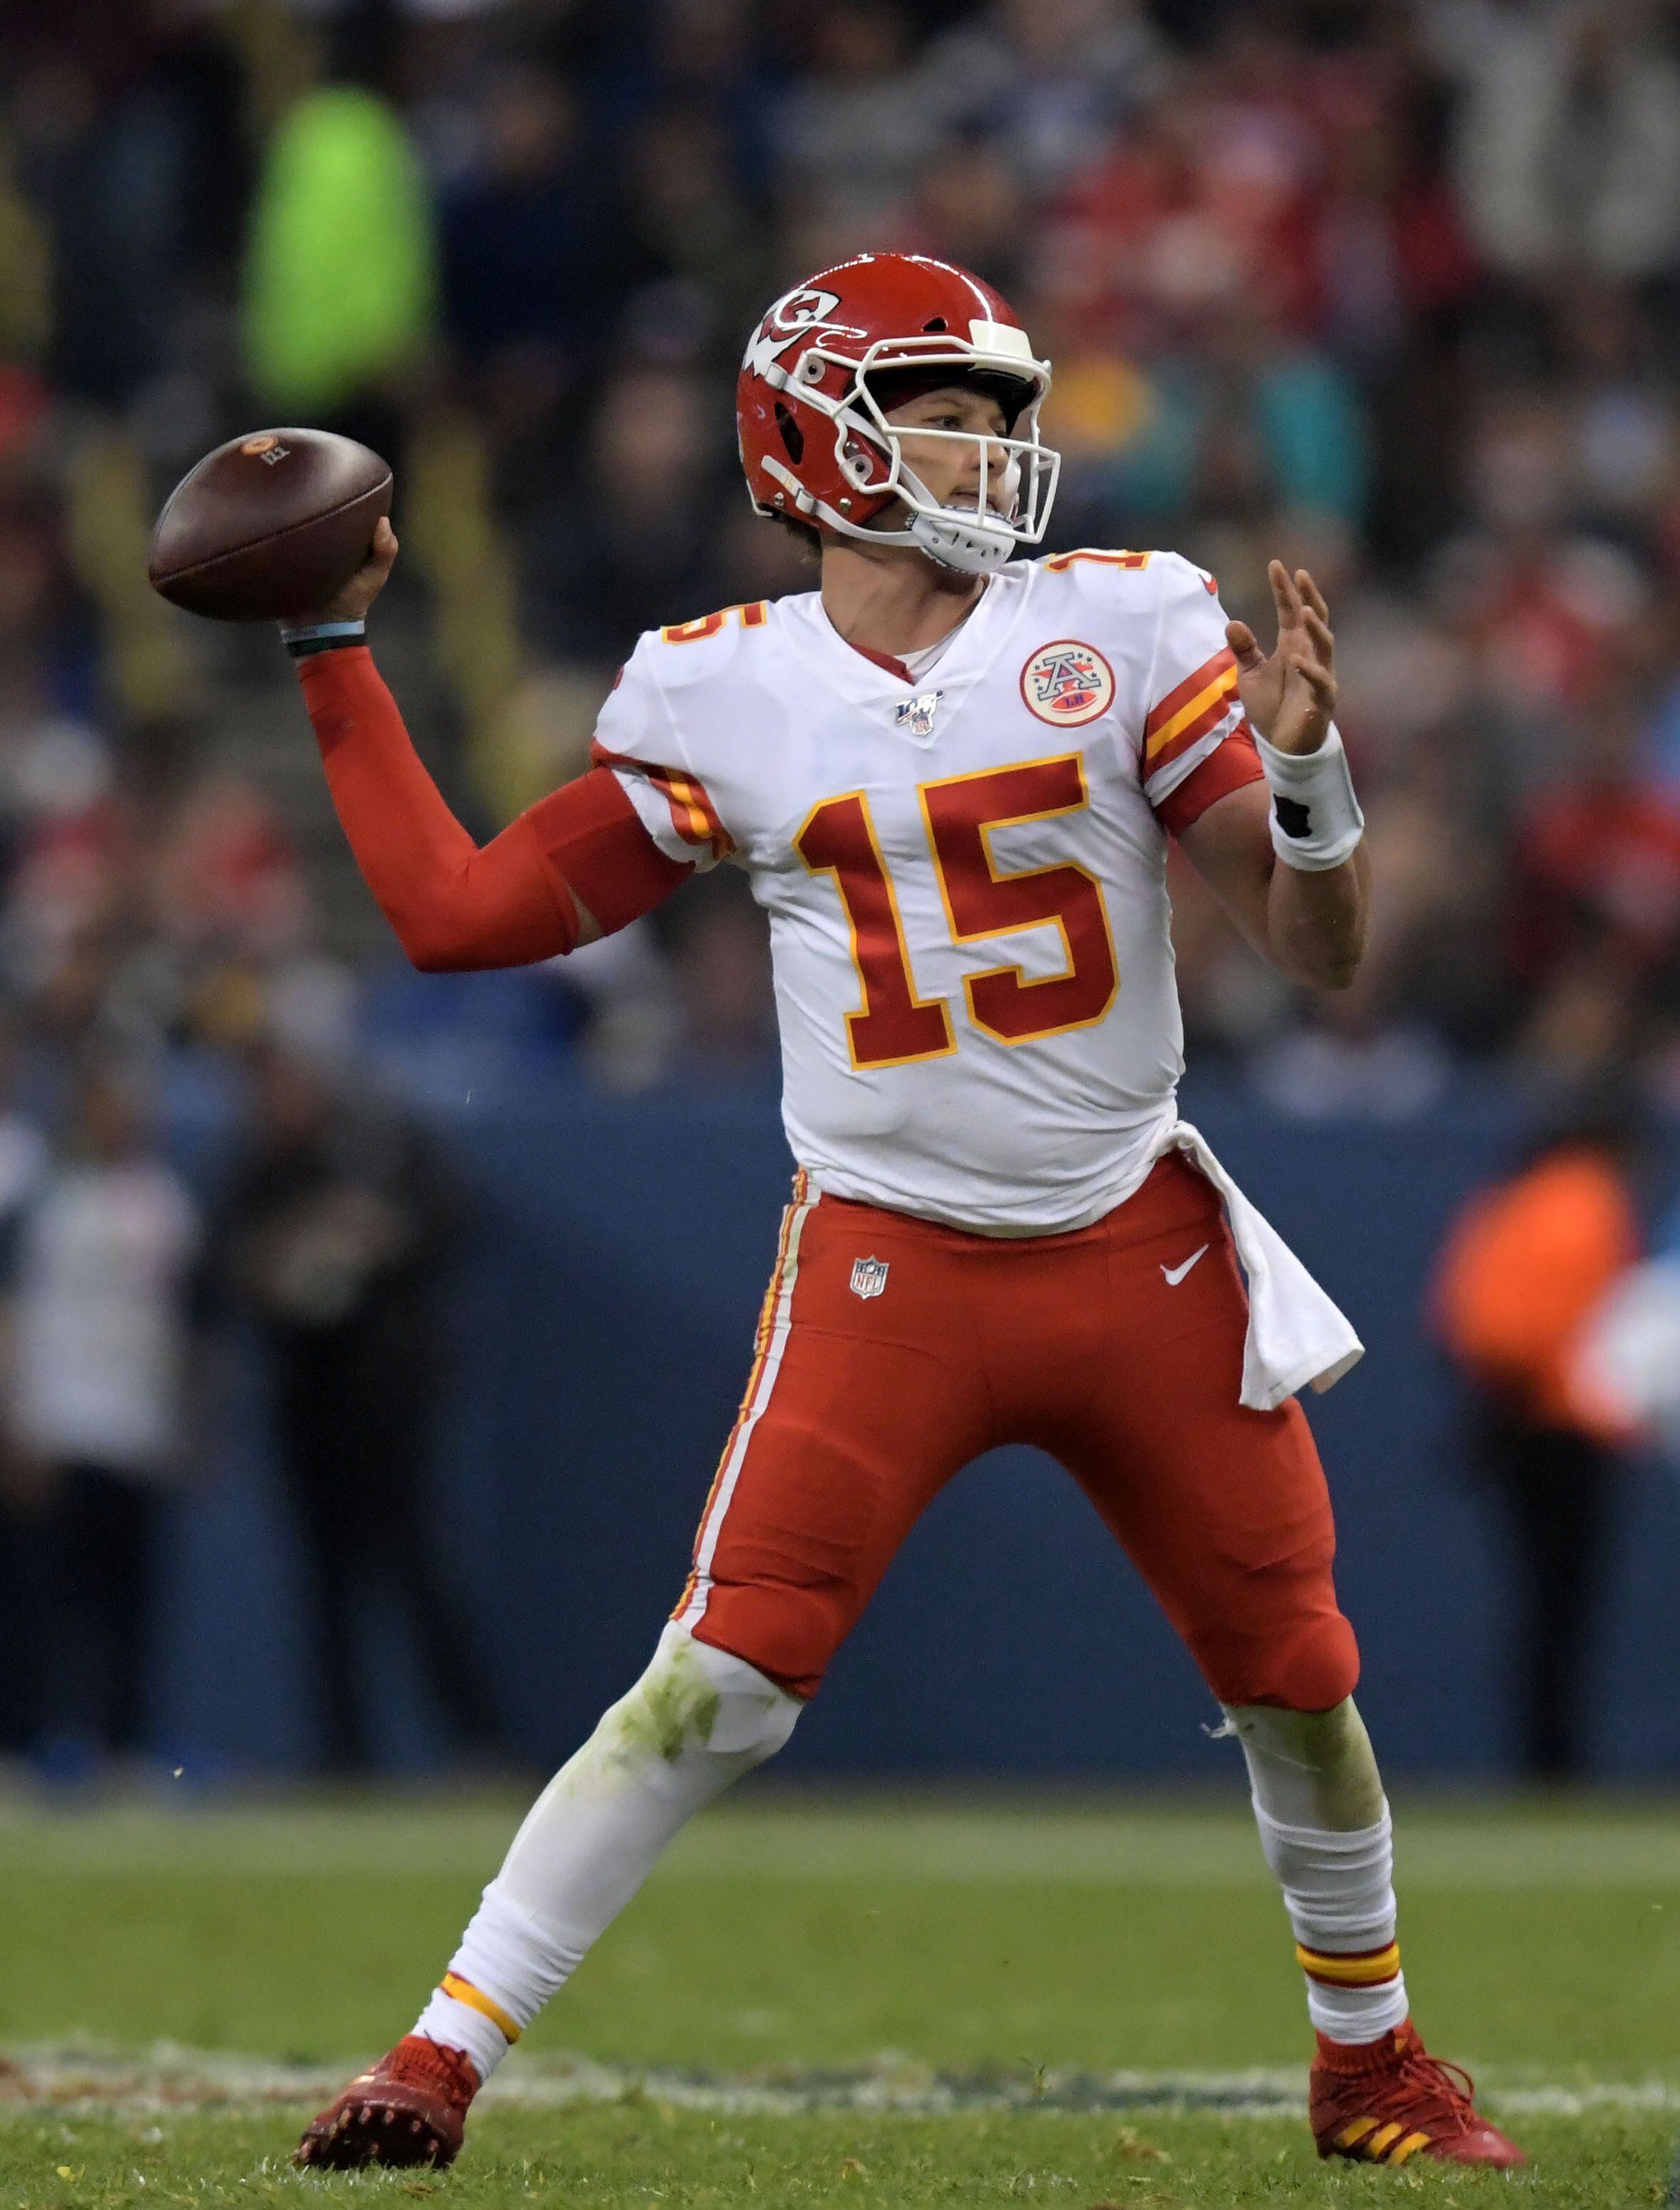 Nov 18, 2019; Mexico City, MEX; Kansas City Chiefs quarterback Patrick Mahomes (15) throws the ball in the third quarter against the Los Angeles Chargers during an NFL International Series game at Estadio Azteca. The Chiefs defeated the Chargers 24-17. Mandatory Credit: Kirby Lee-USA TODAY Sports